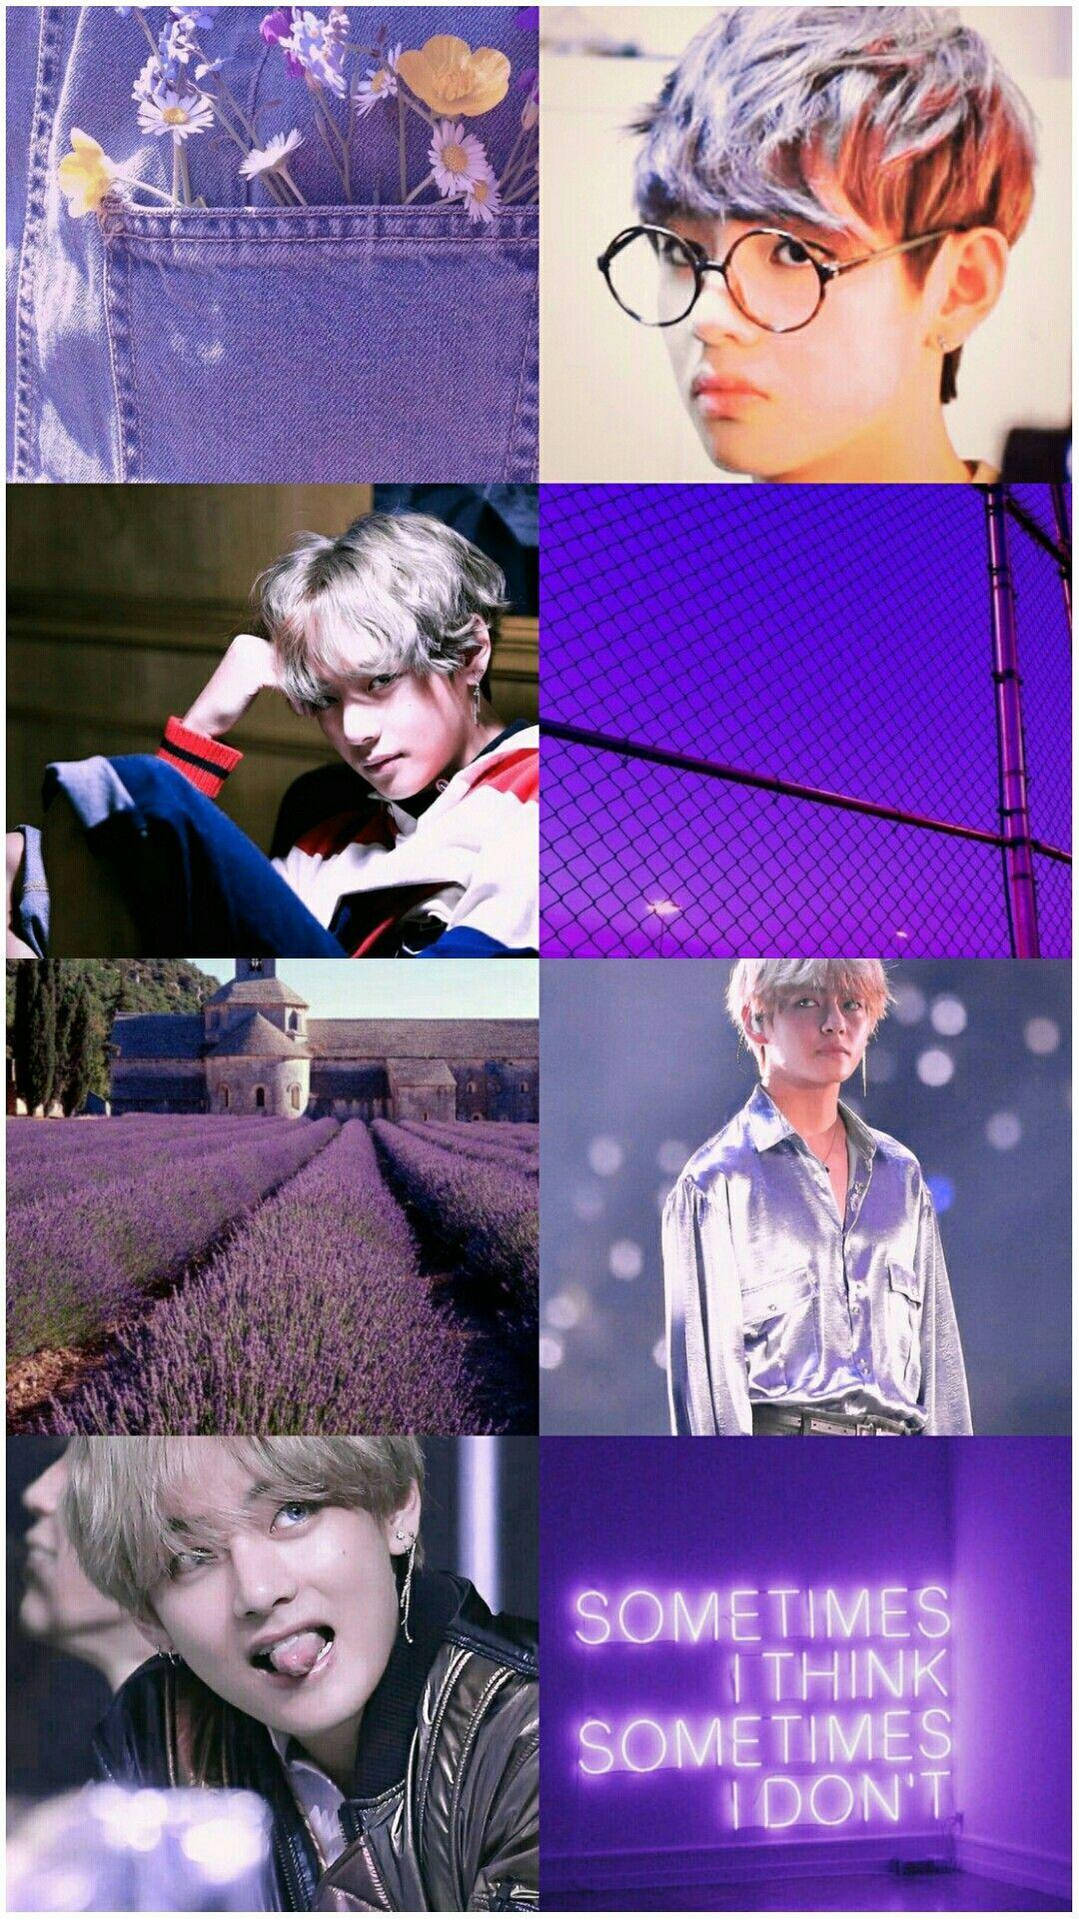 Top 999+ Bts Purple Aesthetic Wallpaper Full HD, 4K✅Free to Use